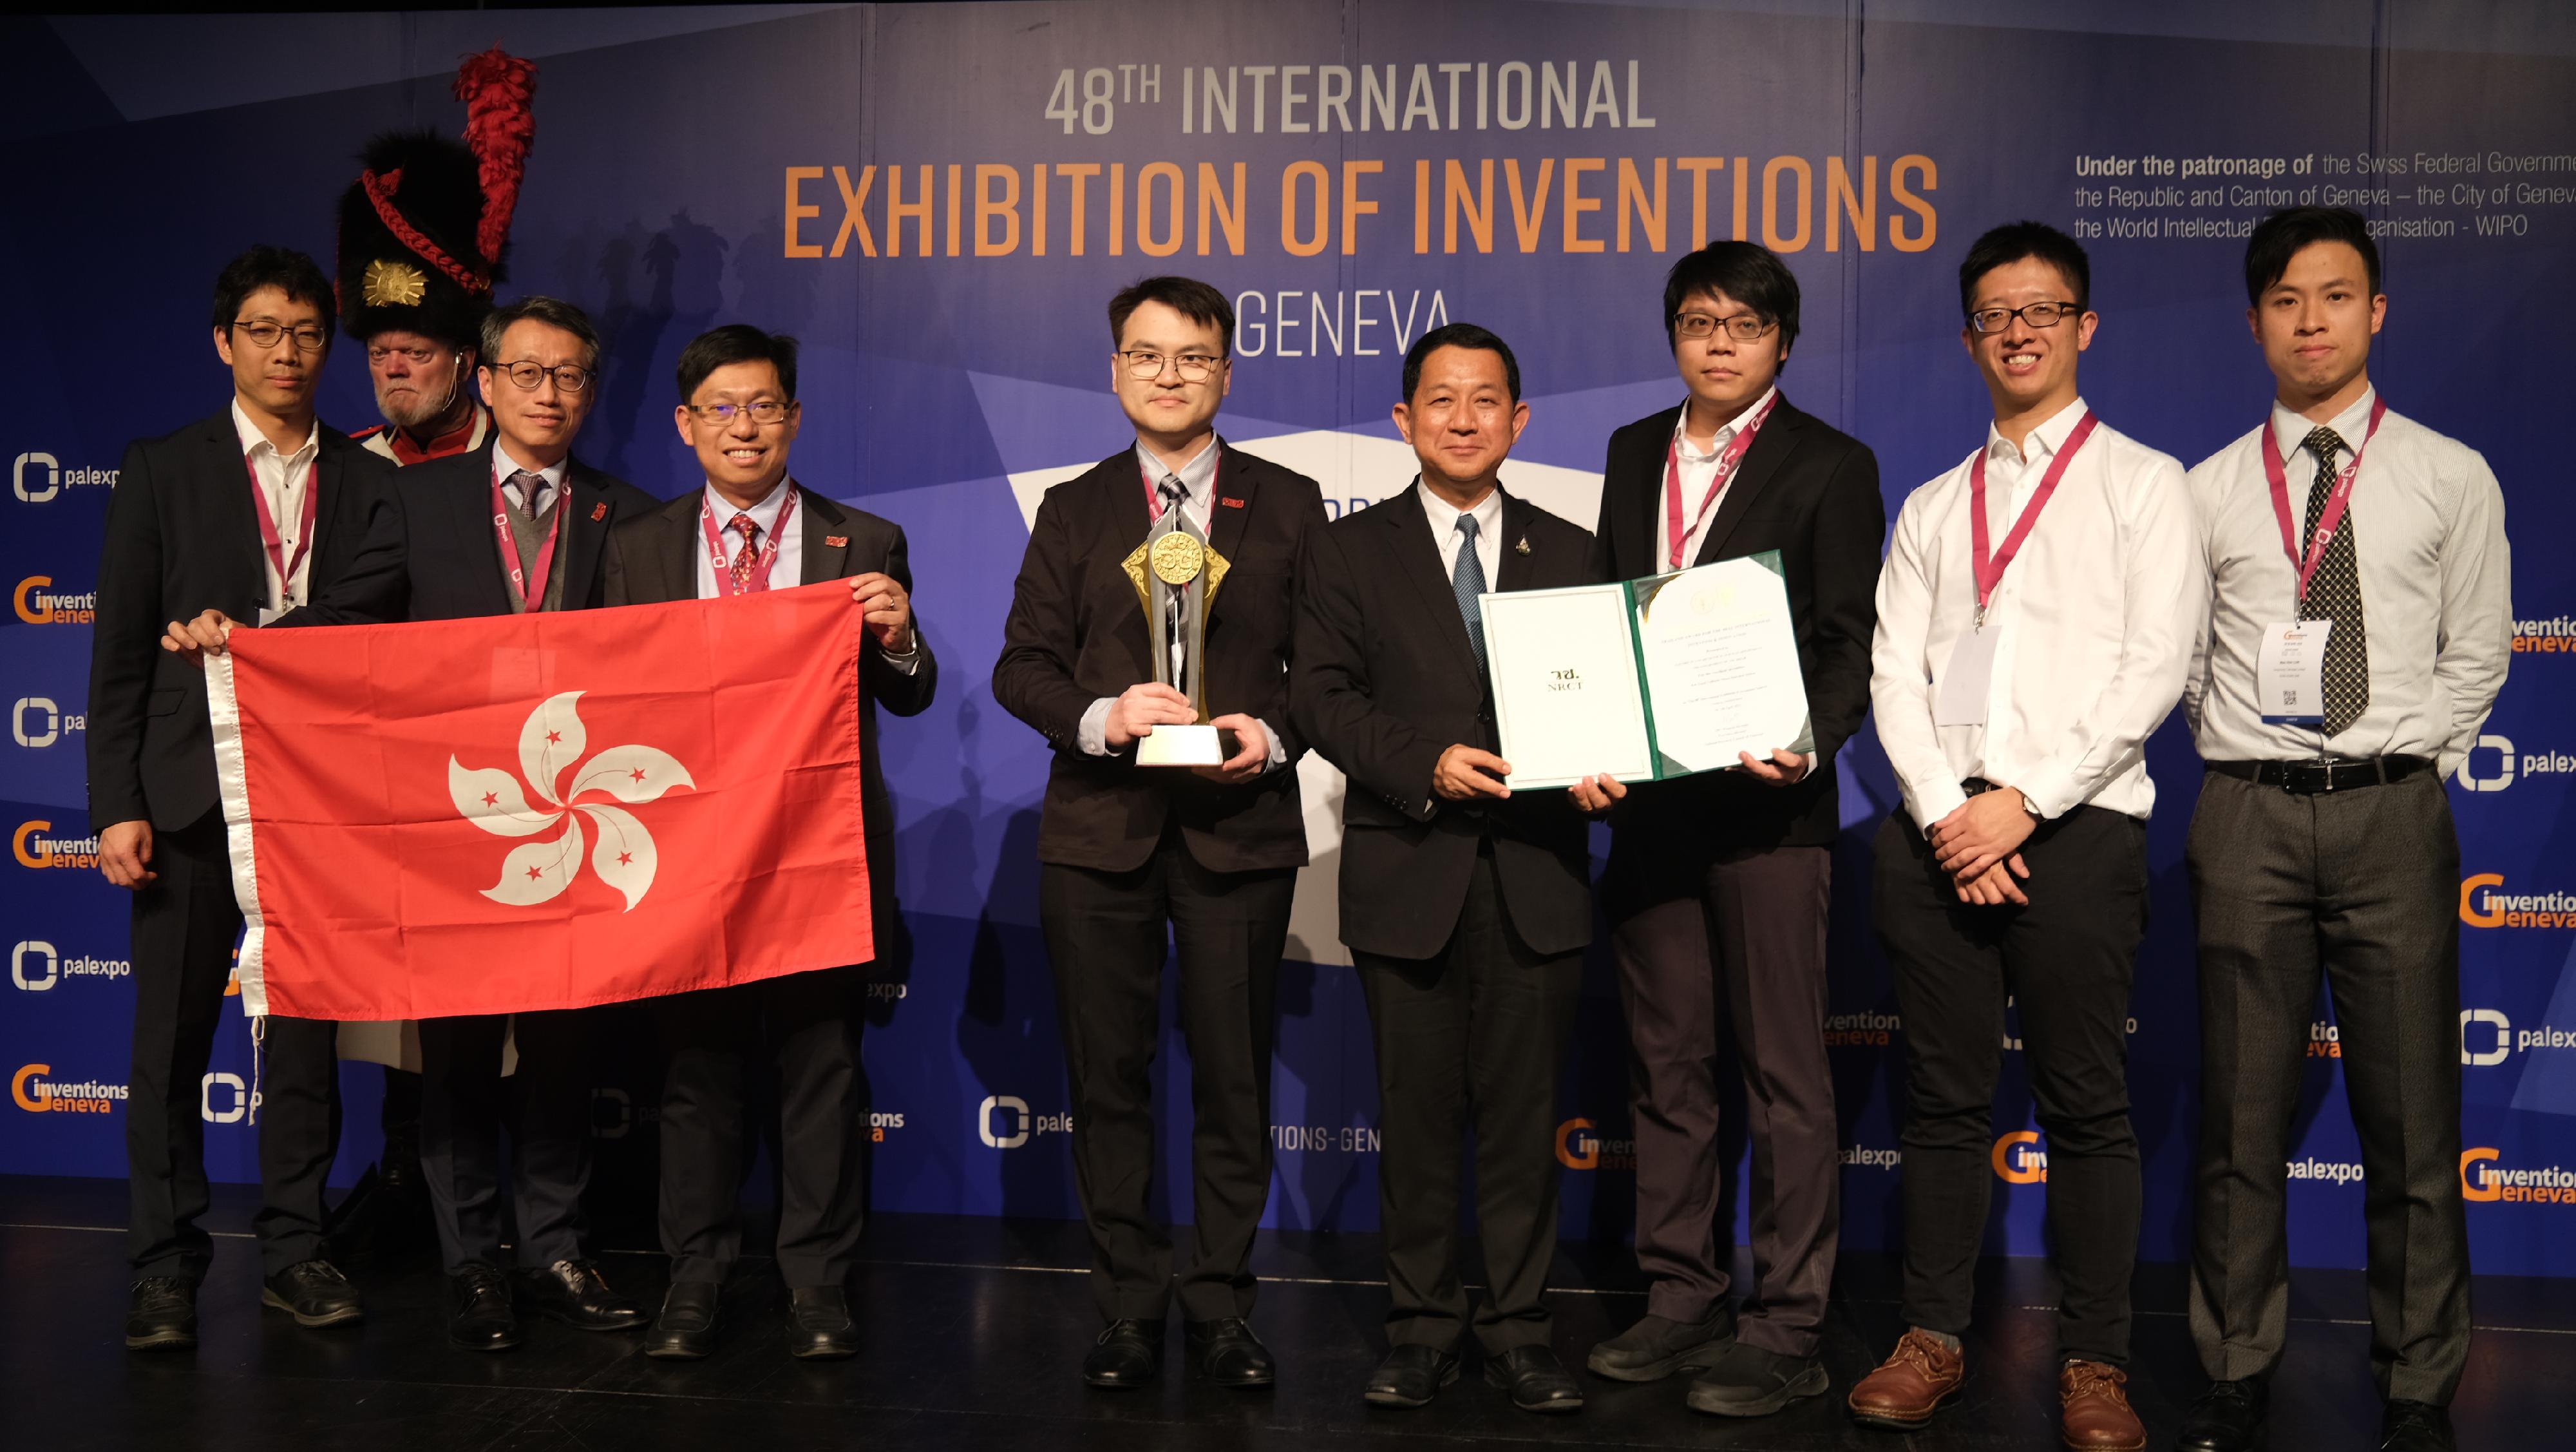 The Electrical and Mechanical Services Department achieved outstanding results at the 48th International Exhibition of Inventions of Geneva, winning one special award, three gold medals, seven silver medals and 12 bronze medals.  Photo shows the Assistant Director of Electrical and Mechanical Services Department, Mr Arthur Lee (fourth left), and the team received the Special Award at the prize-giving ceremony yesterday (April 28, Geneva time).